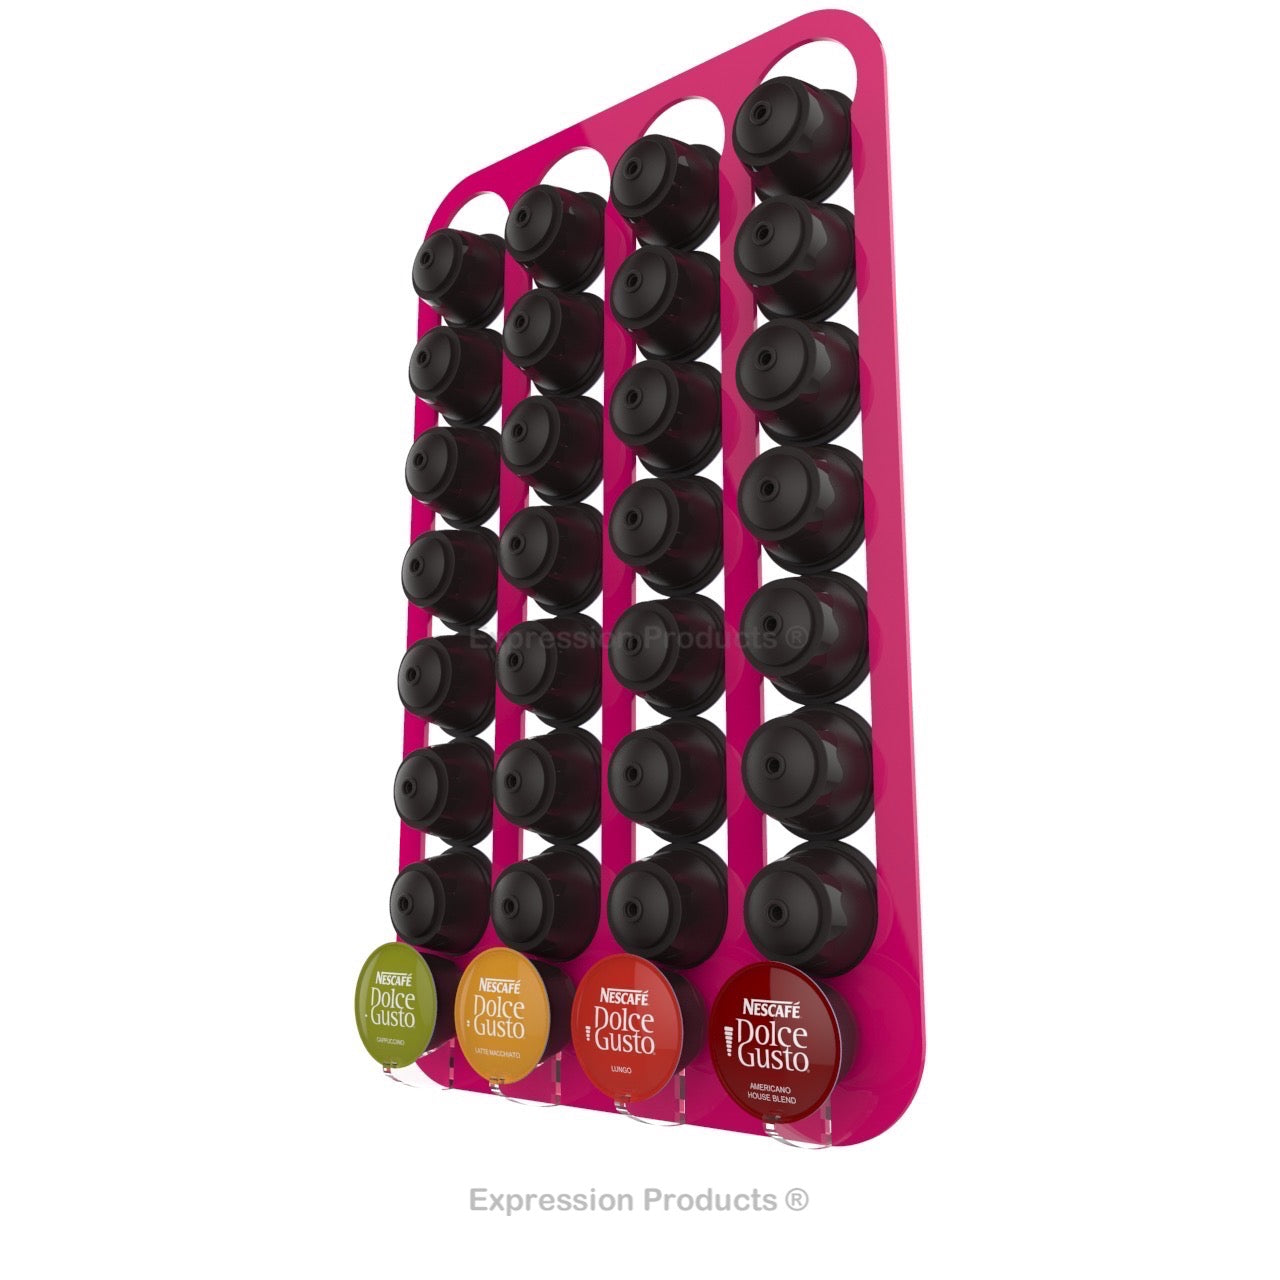 Dolce Gusto Coffee Pod Holder, Wall Mounted.  Shown in Pink Holding 32 Pods